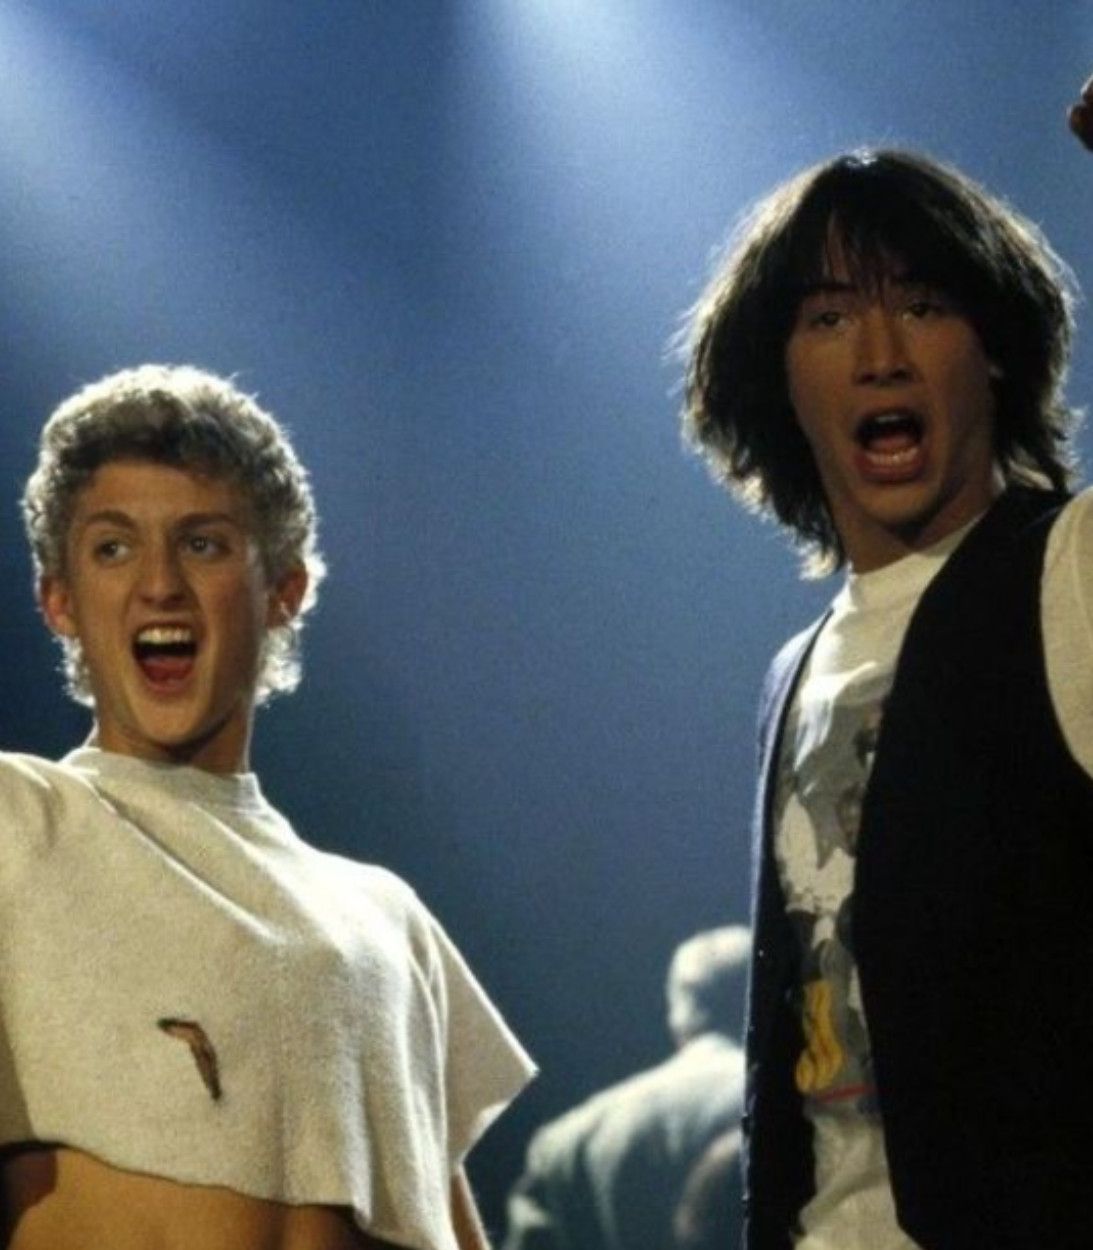 Bill &amp; Ted Image Vertical 3